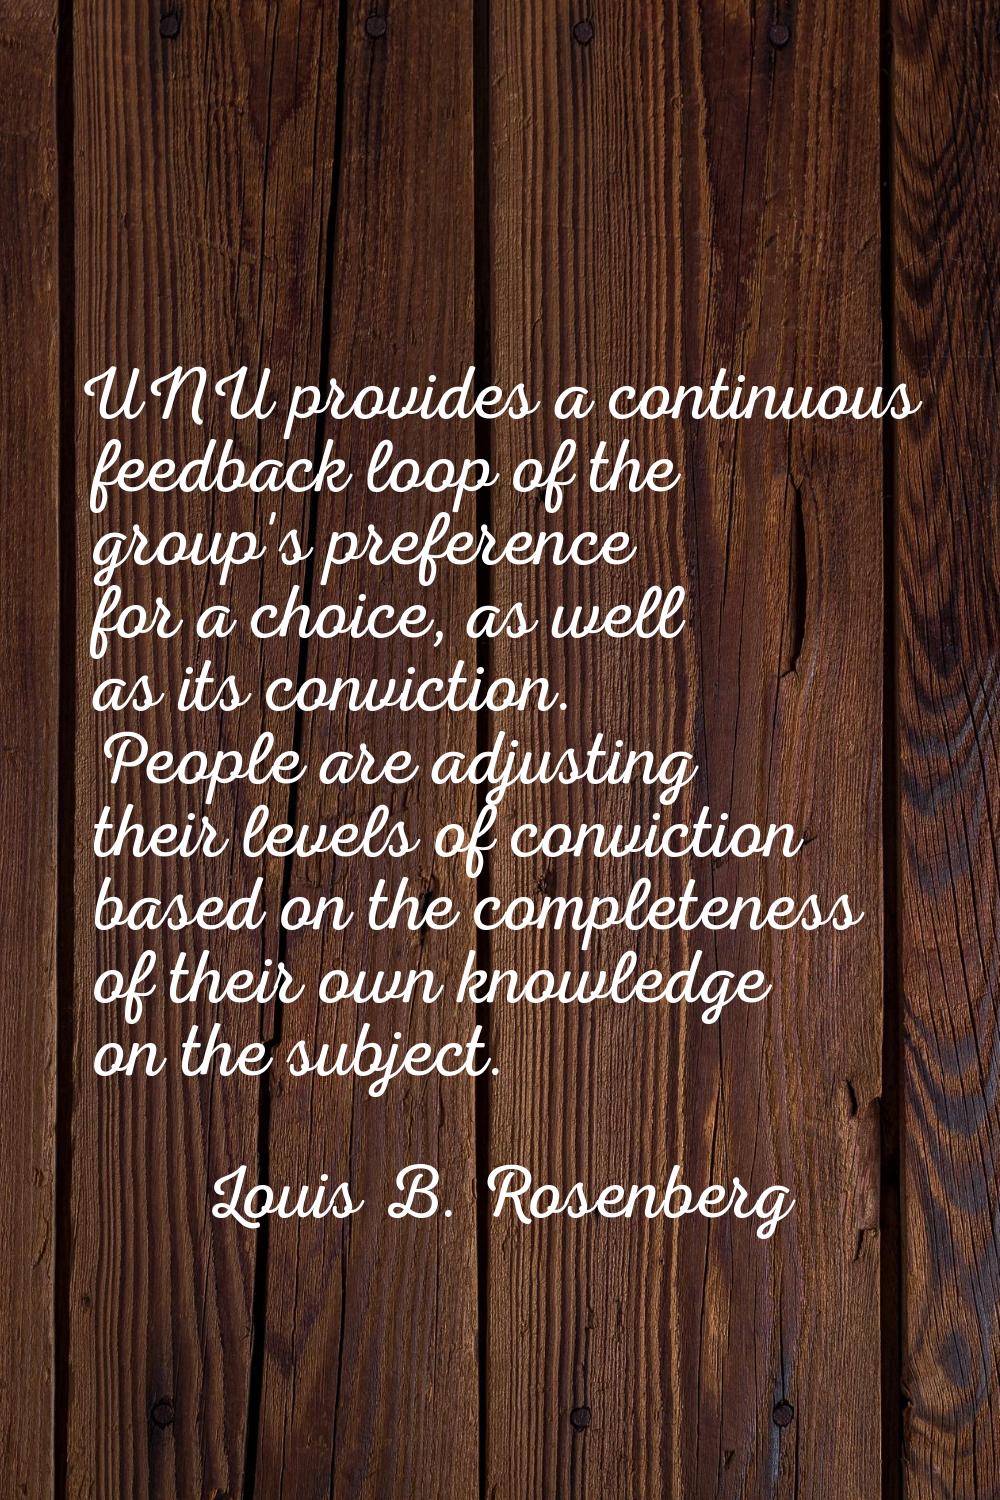 UNU provides a continuous feedback loop of the group's preference for a choice, as well as its conv